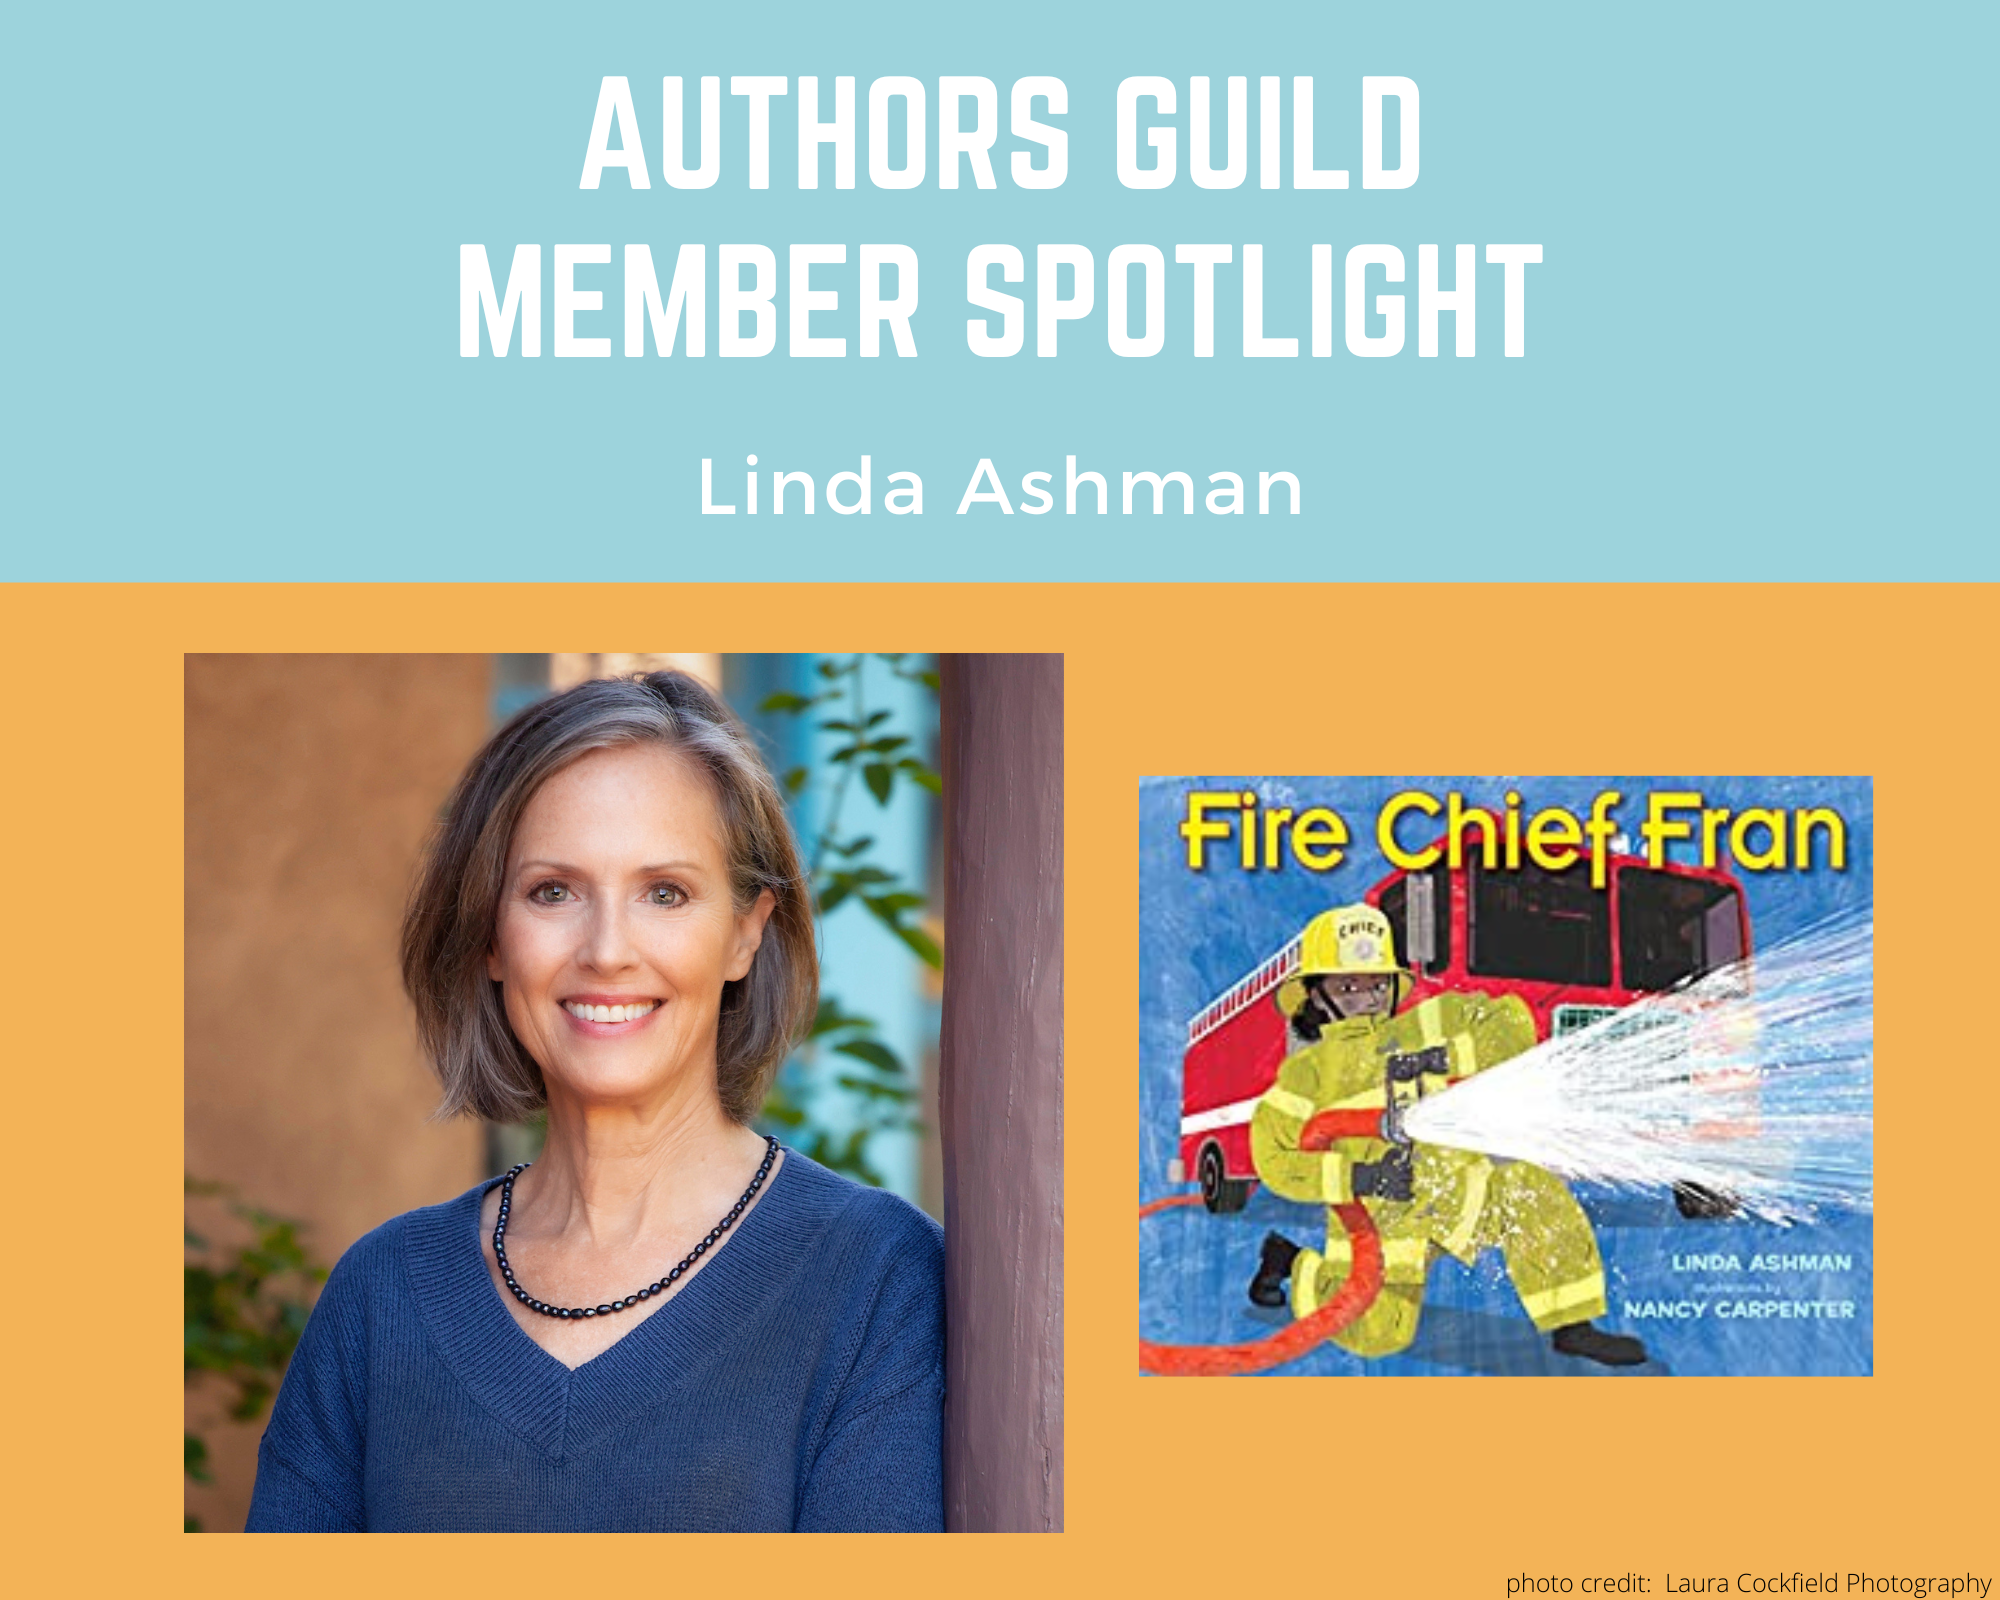 author Linda Ashman and her book Fire Chief Fran